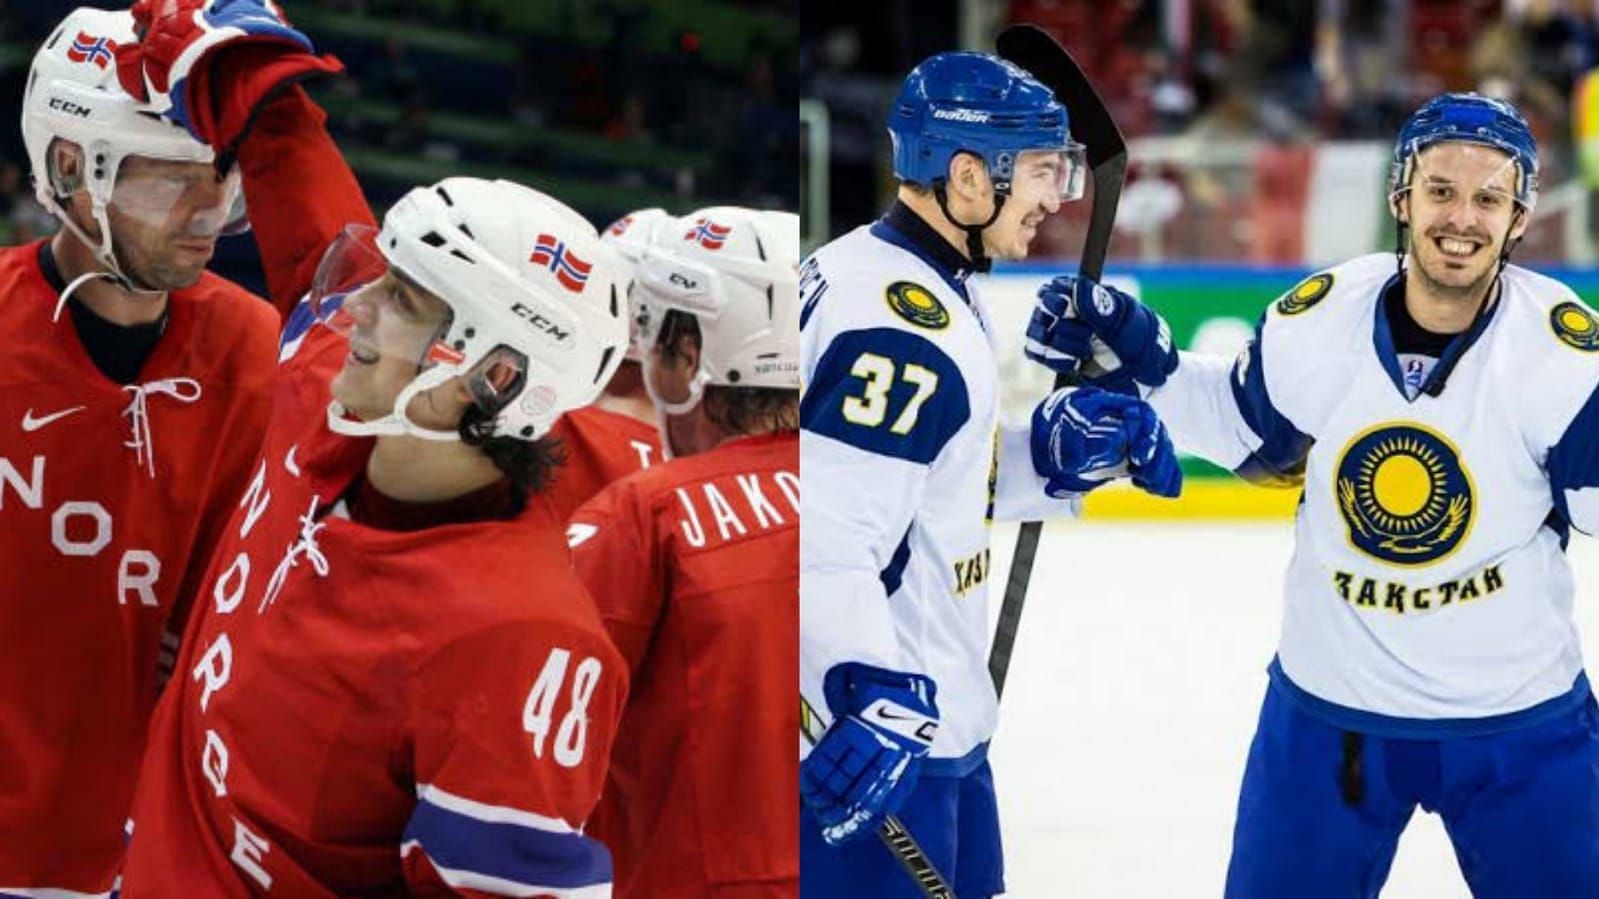 Norway vs Kazakhstan Group B How to watch, live streaming, channel list and more